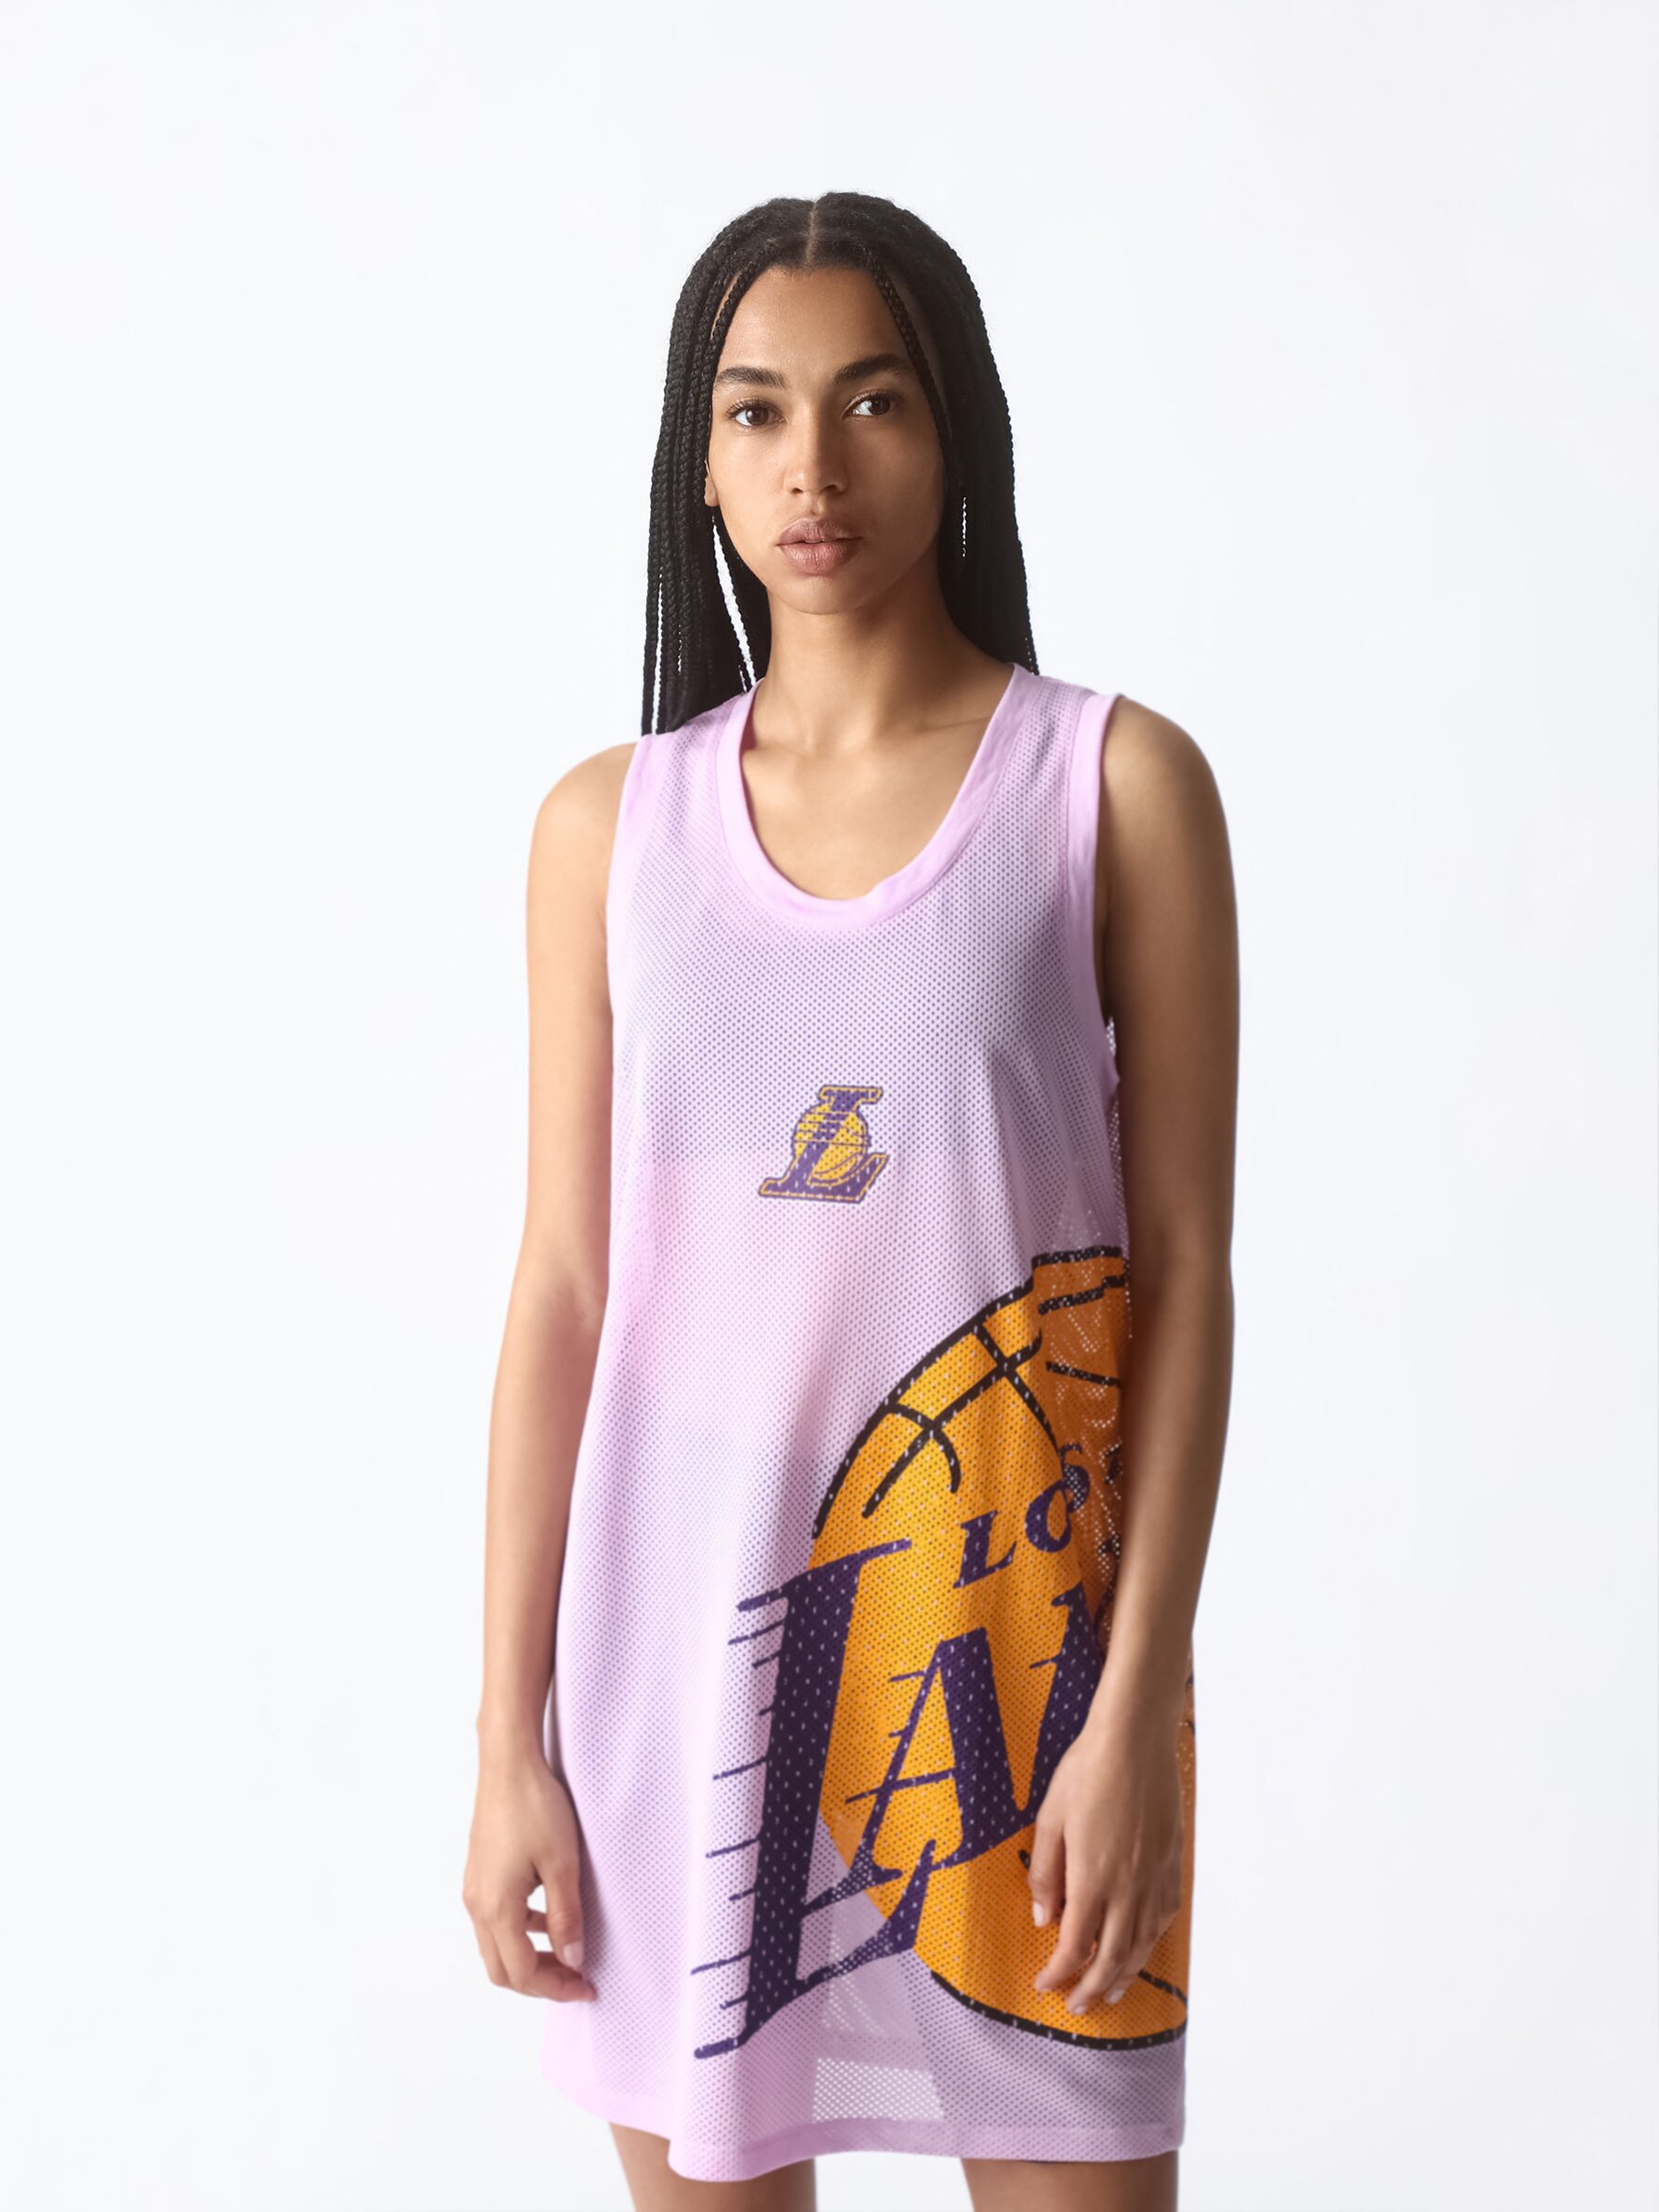 Women's Los Angeles Lakers Gear, Womens Lakers Apparel, Ladies Lakers  Outfits